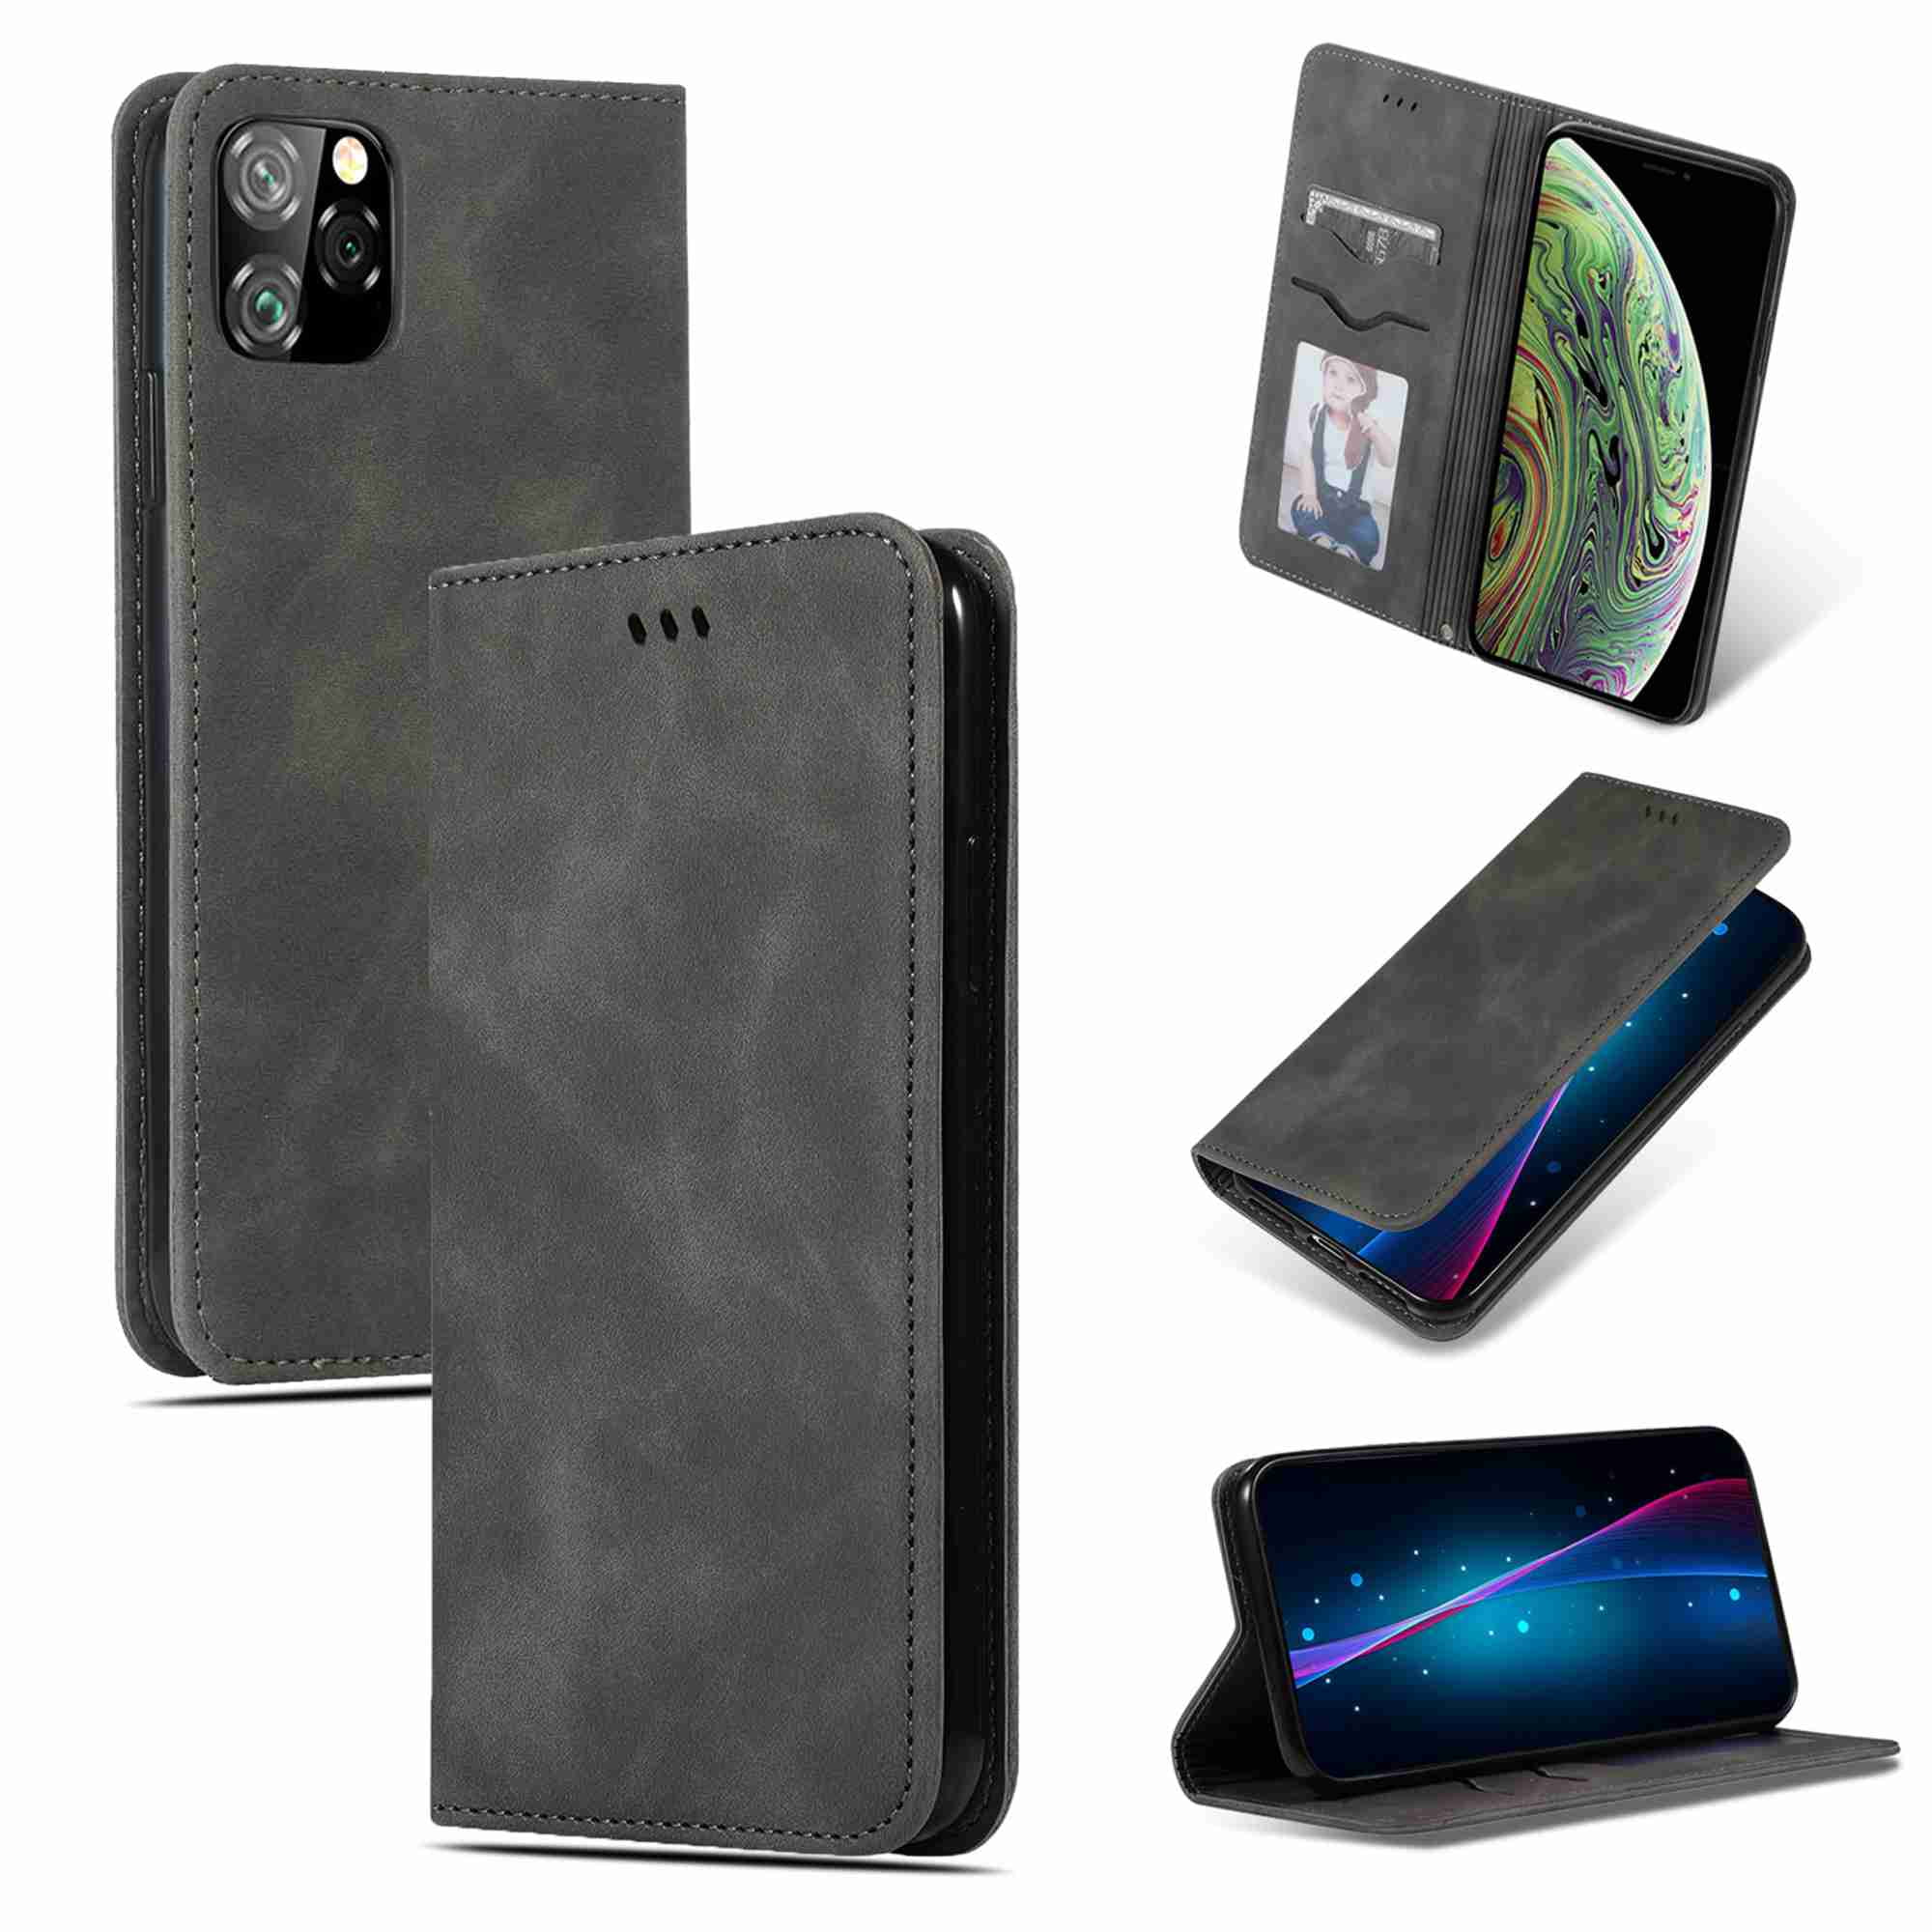 iPhone 8 Plus Flip Case Cover for Leather Kickstand Card Holders Mobile Phone case Extra-Protective Business Flip Cover 